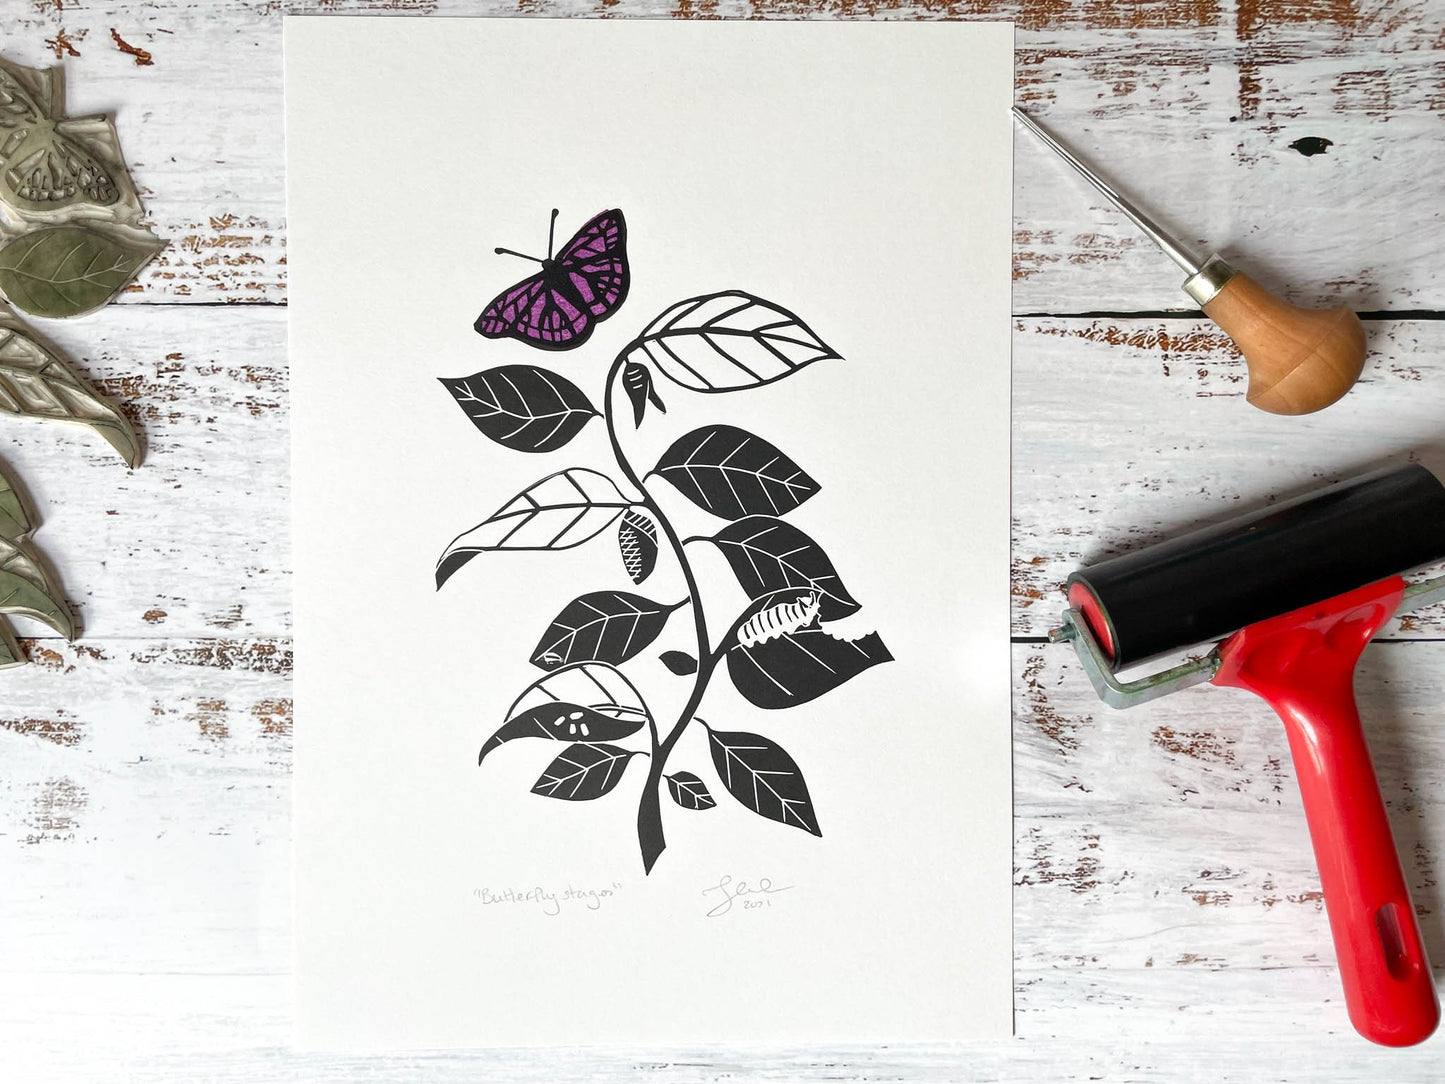 A lino print depicting the stages of a caterpillar turning into a butterfly while going up a vine